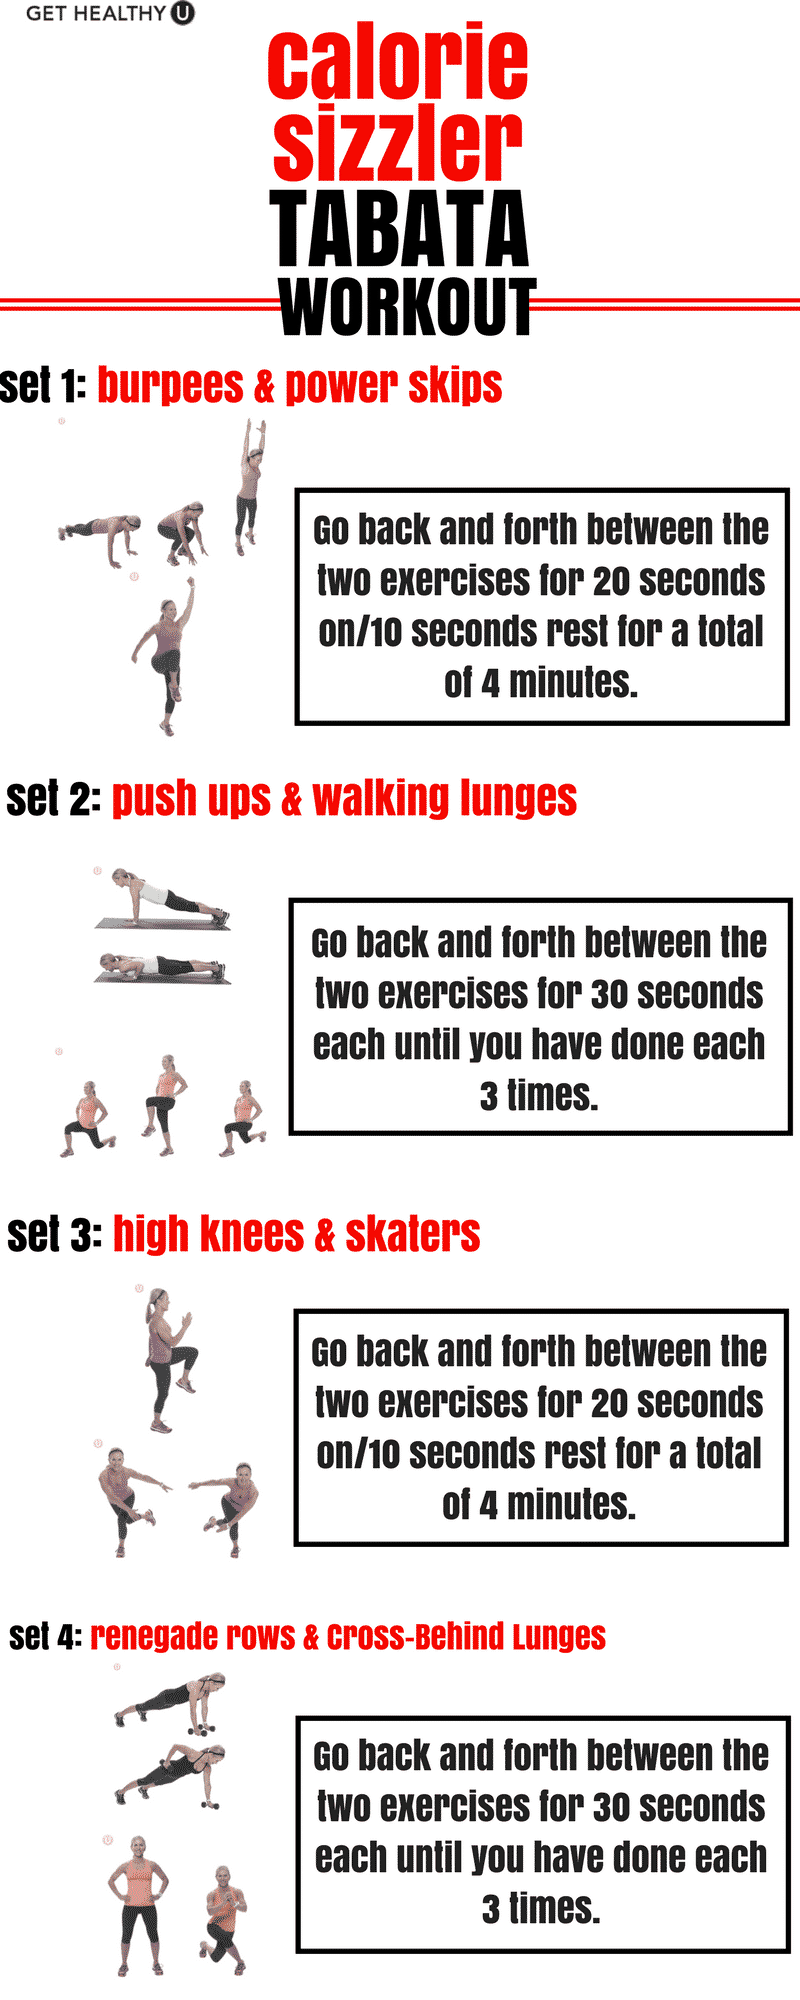 Hykler Recept Folkeskole Calorie Sizzler Tabata Workout With Weights